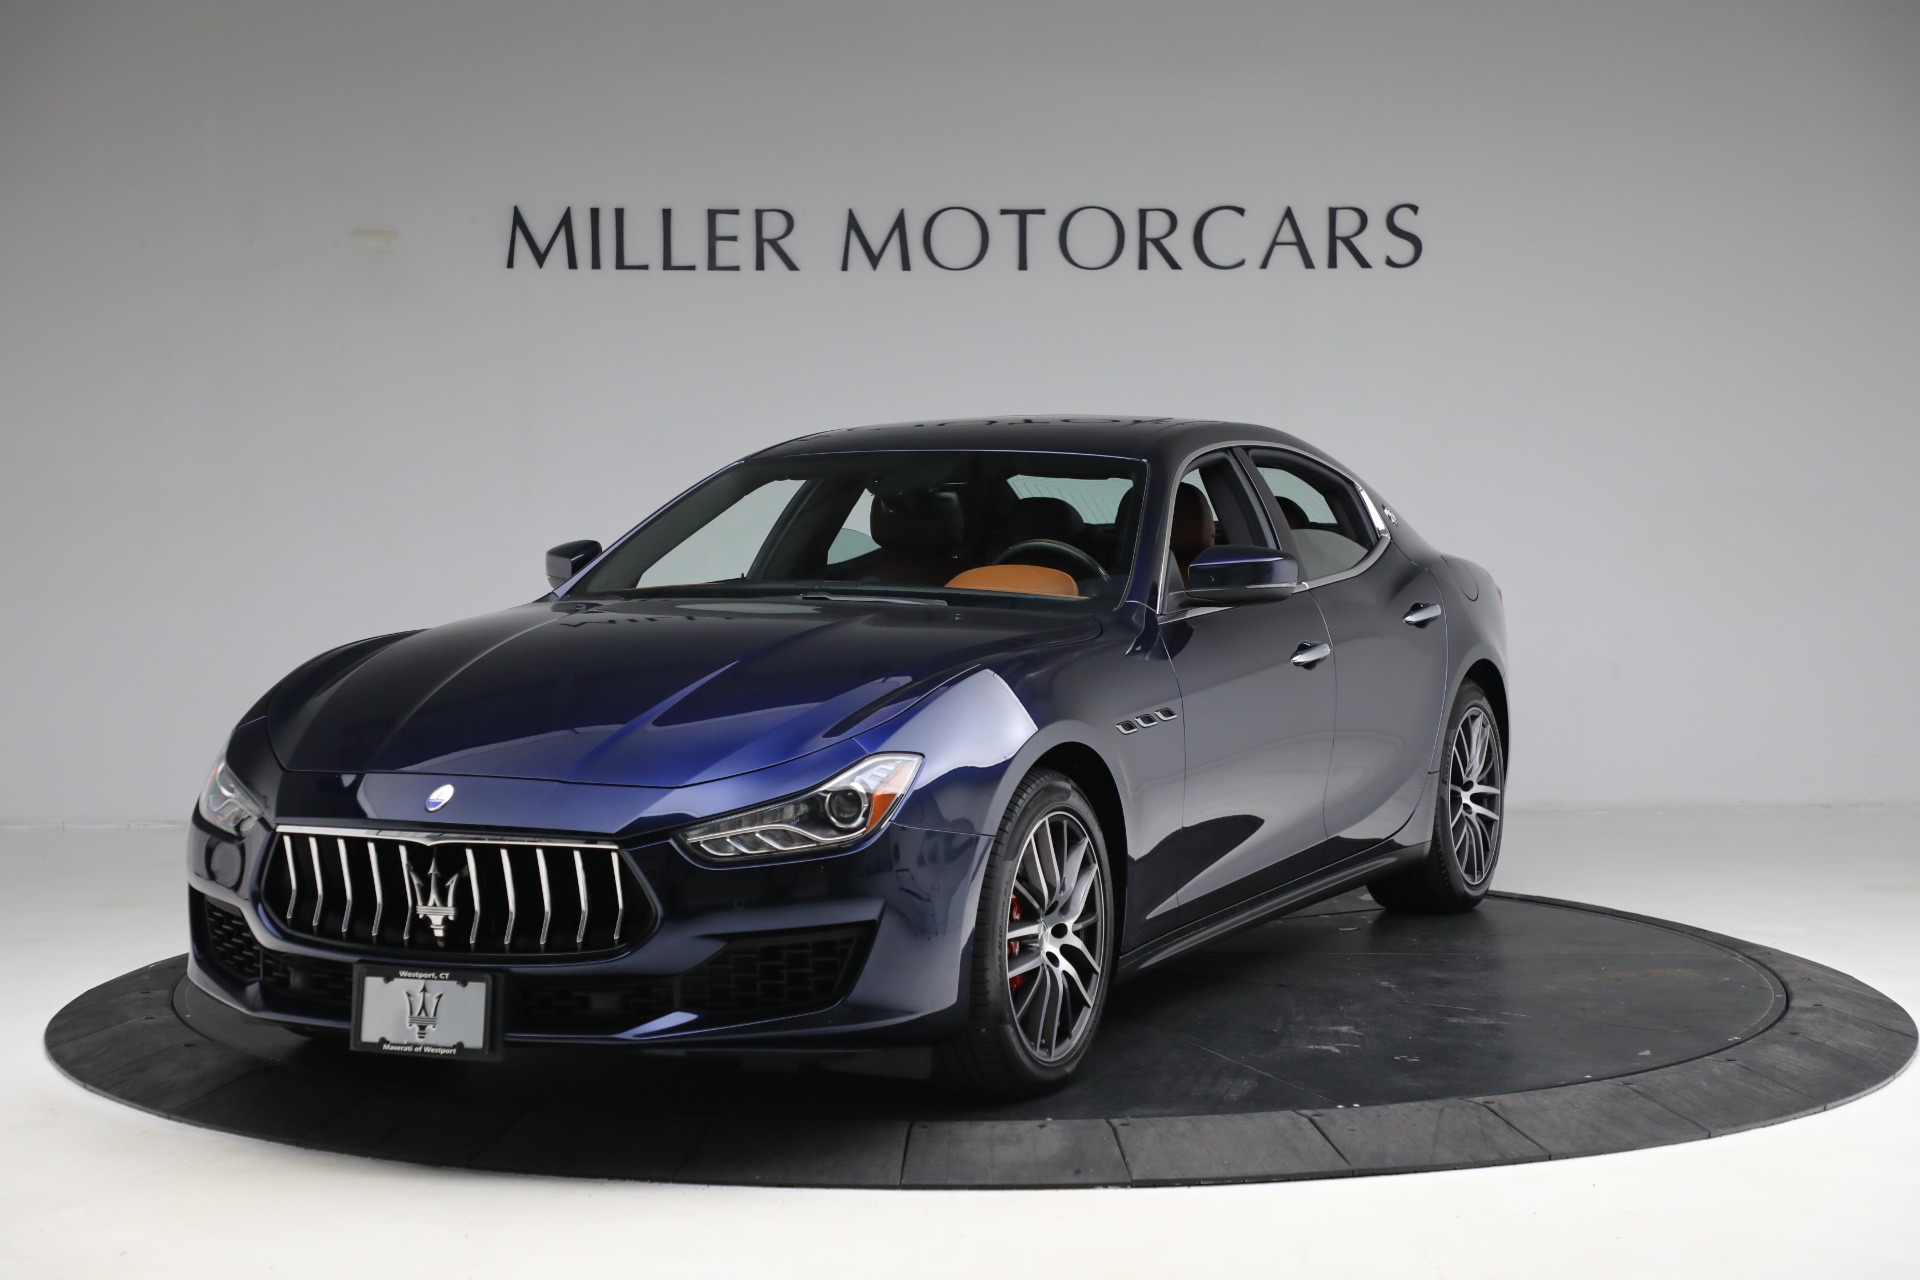 Used 2019 Maserati Ghibli S Q4 for sale Sold at Rolls-Royce Motor Cars Greenwich in Greenwich CT 06830 1